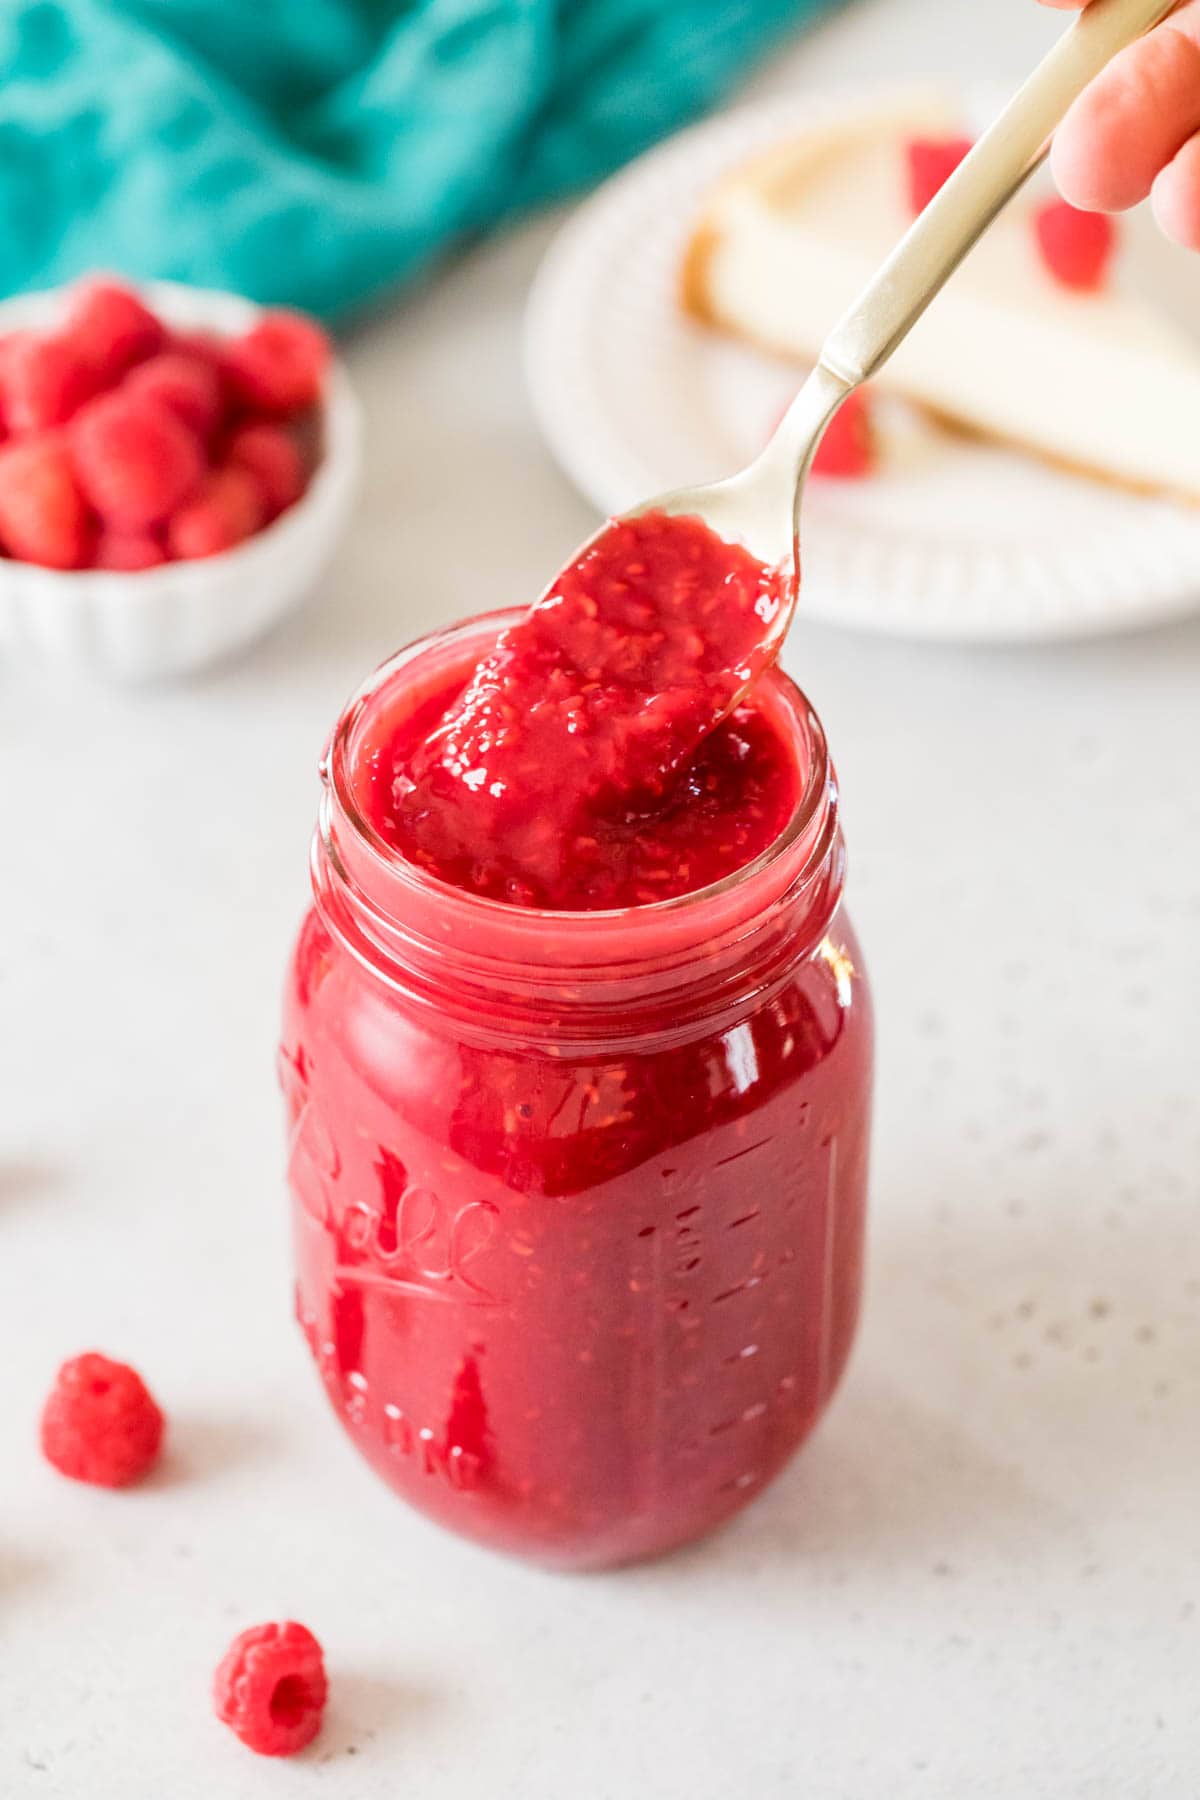 Spoon scooping a red sauce made from raspberries out of a mason jar.